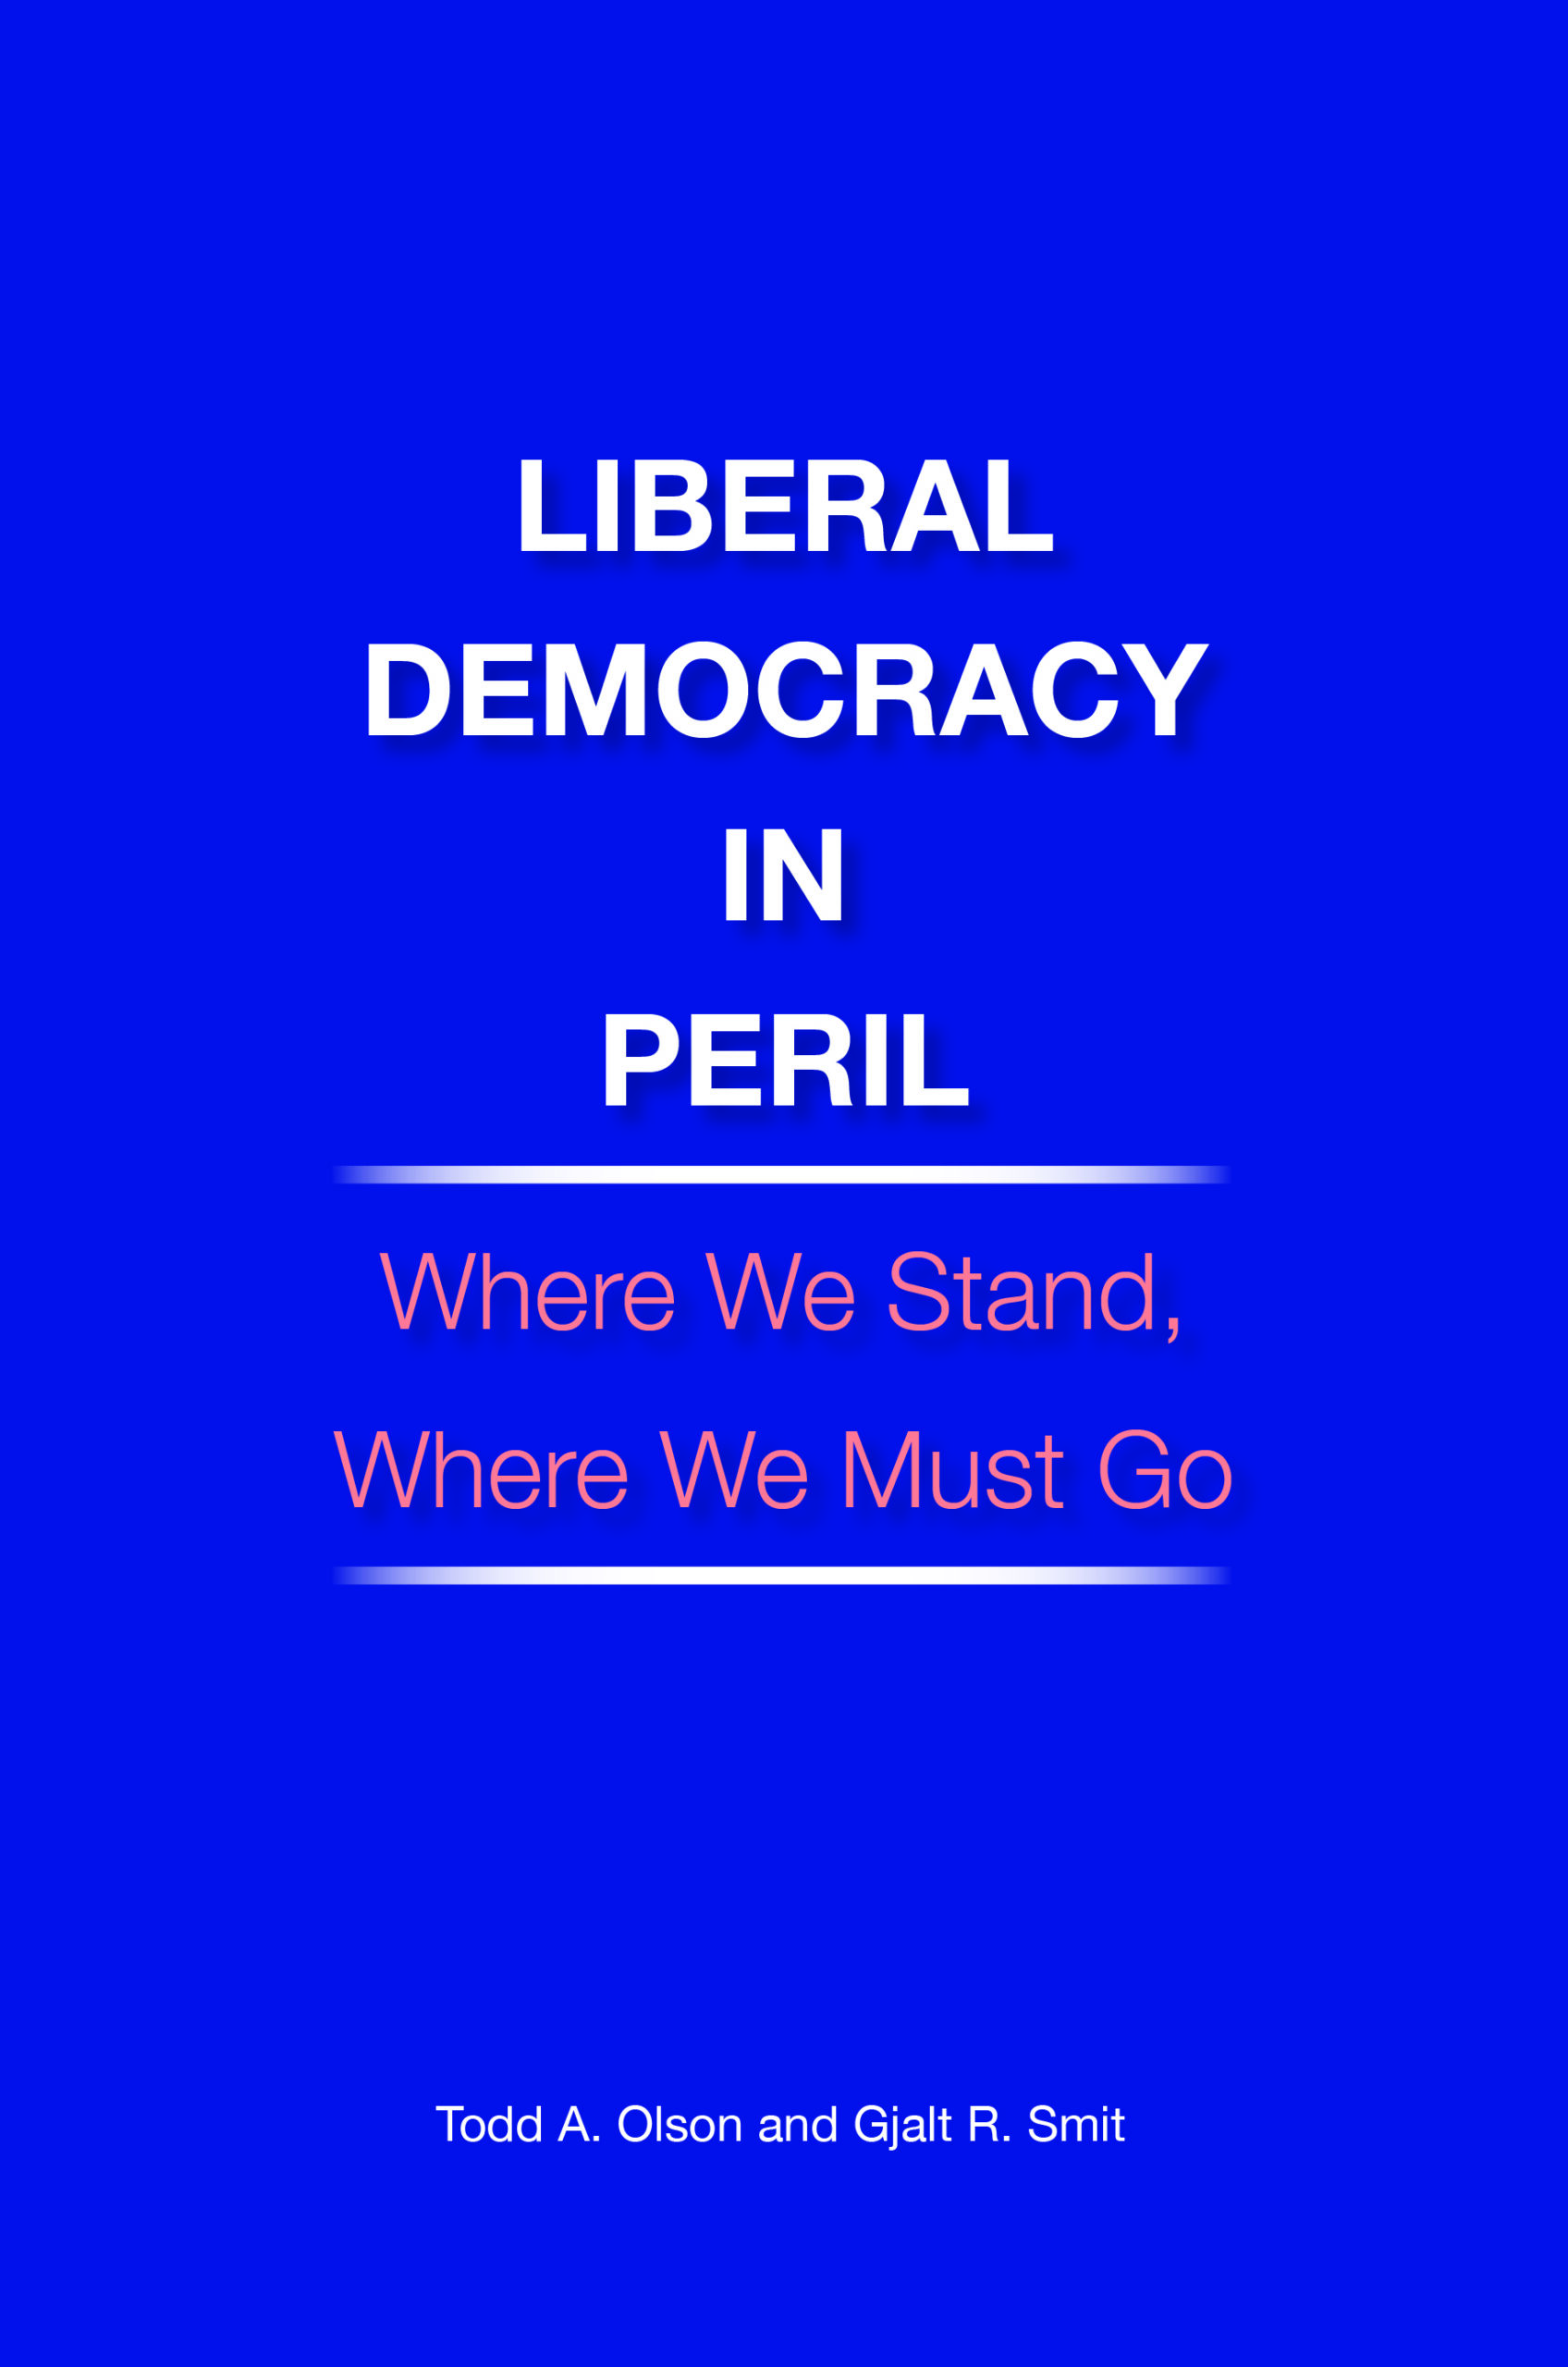 Liberal Democracy in Peril by Todd A. Olson and Gjalt R. Smit